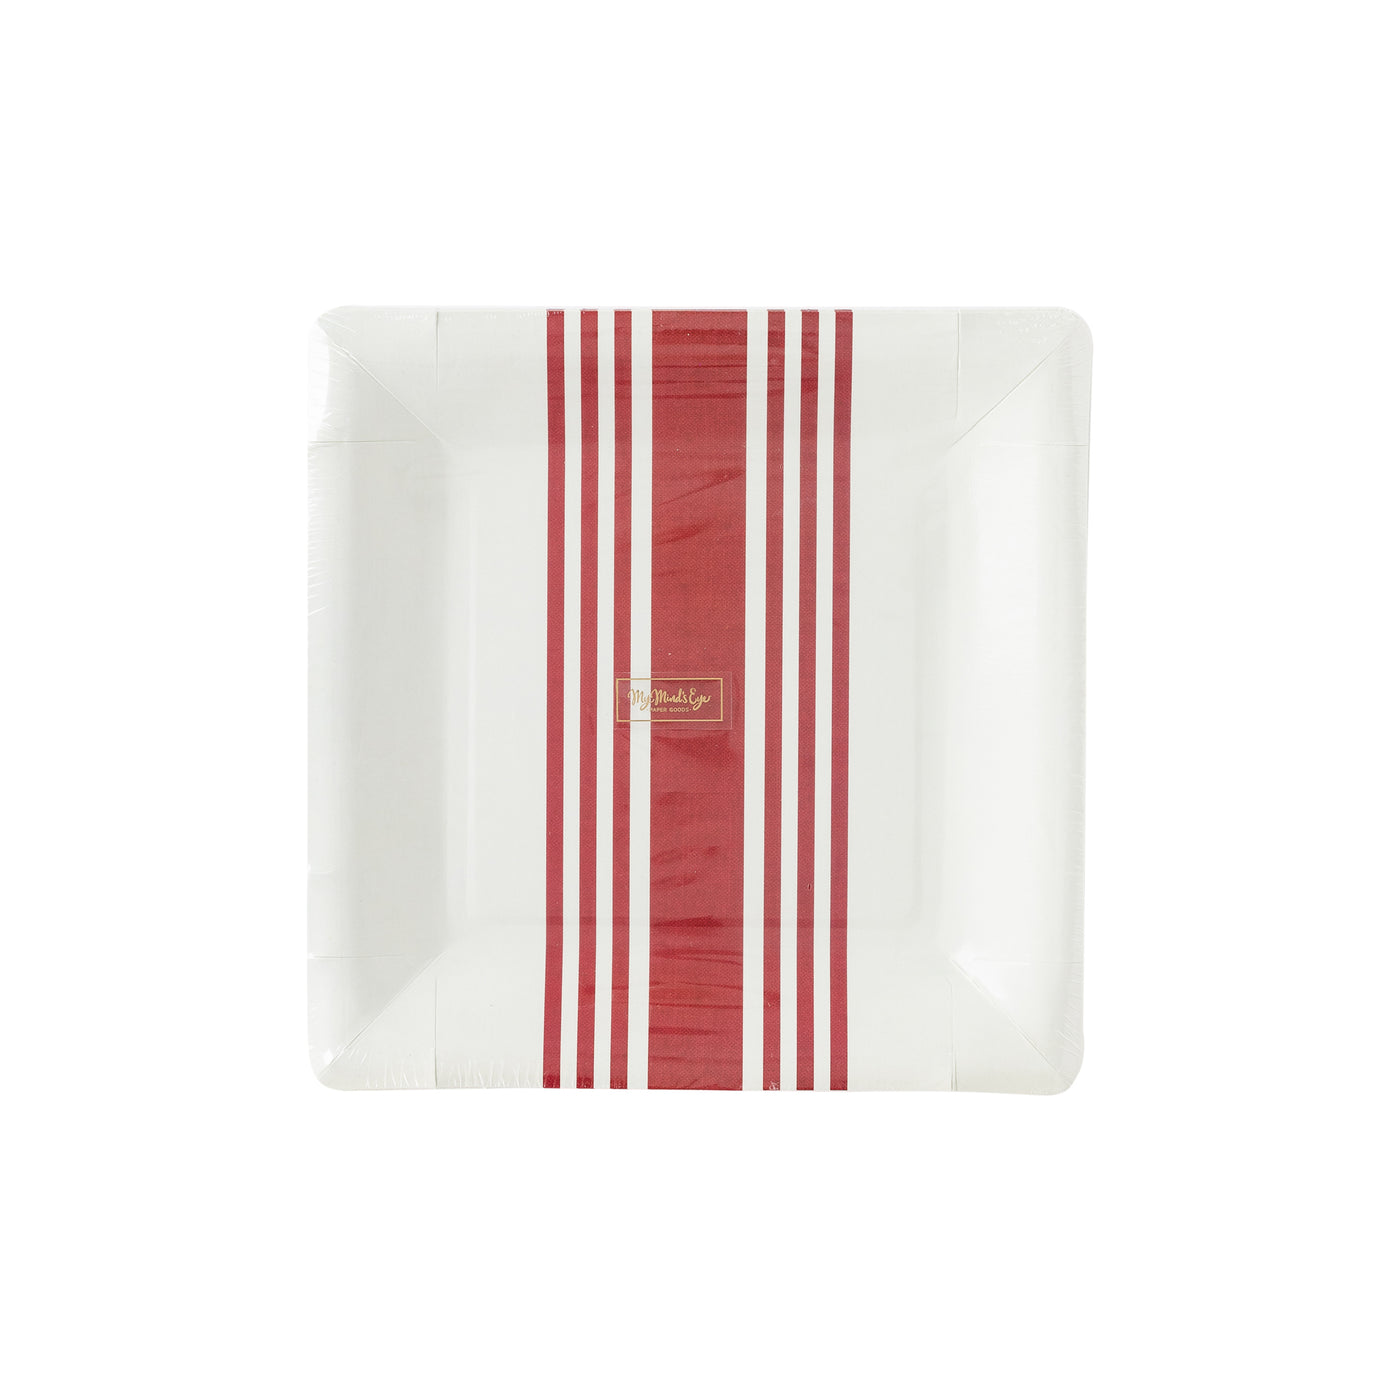 Hamptons Red Striped Square Plates